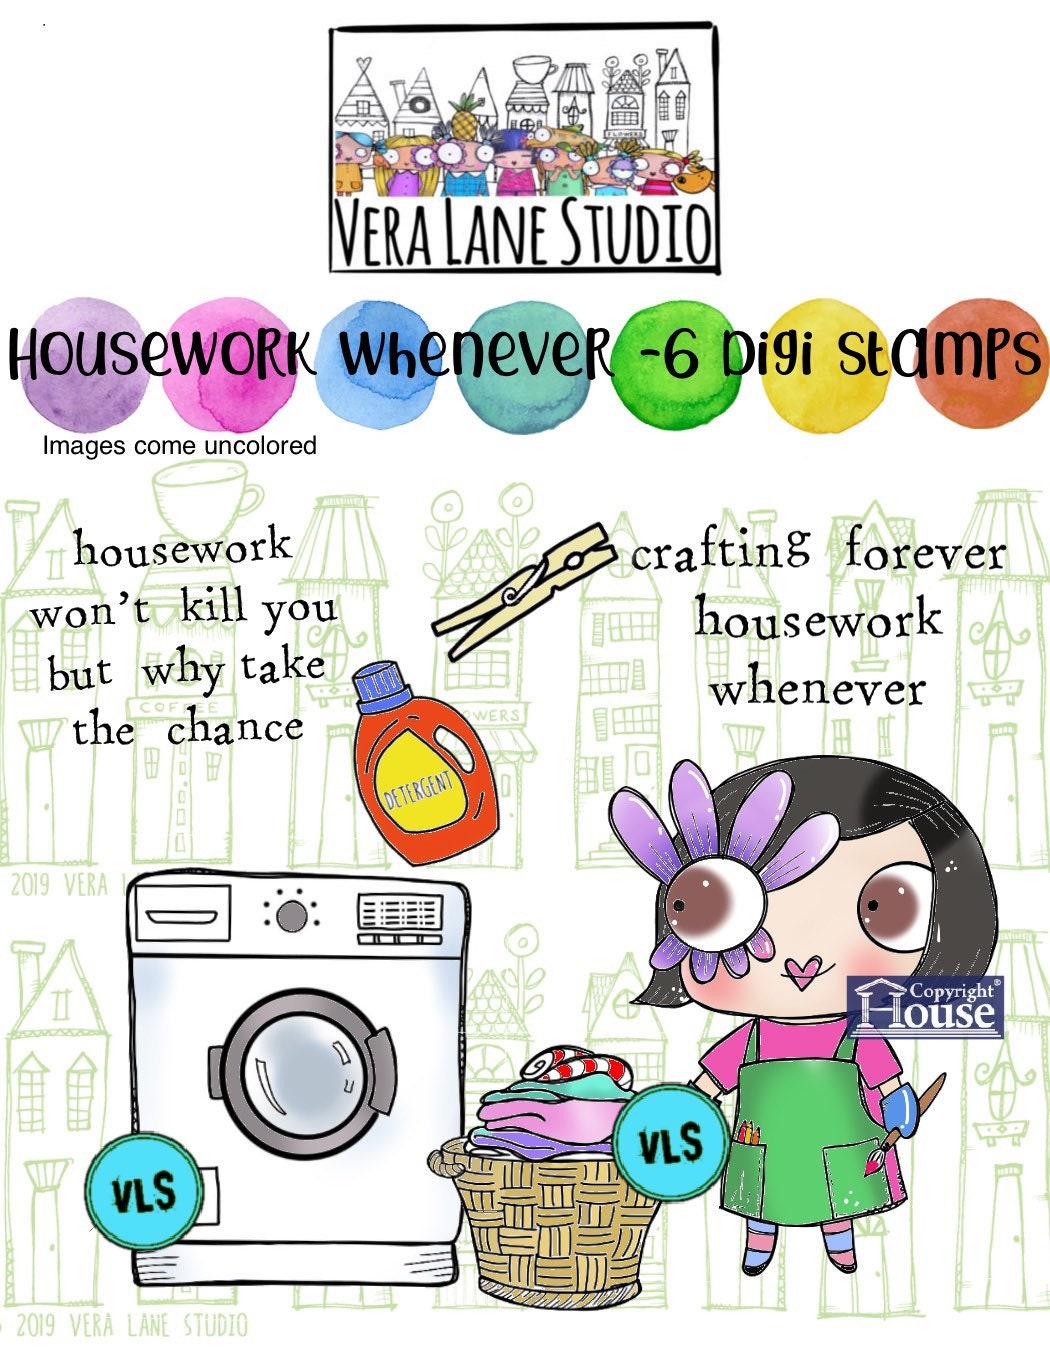 Housework whenever -  7 digi stamp bundle in jpg and png files